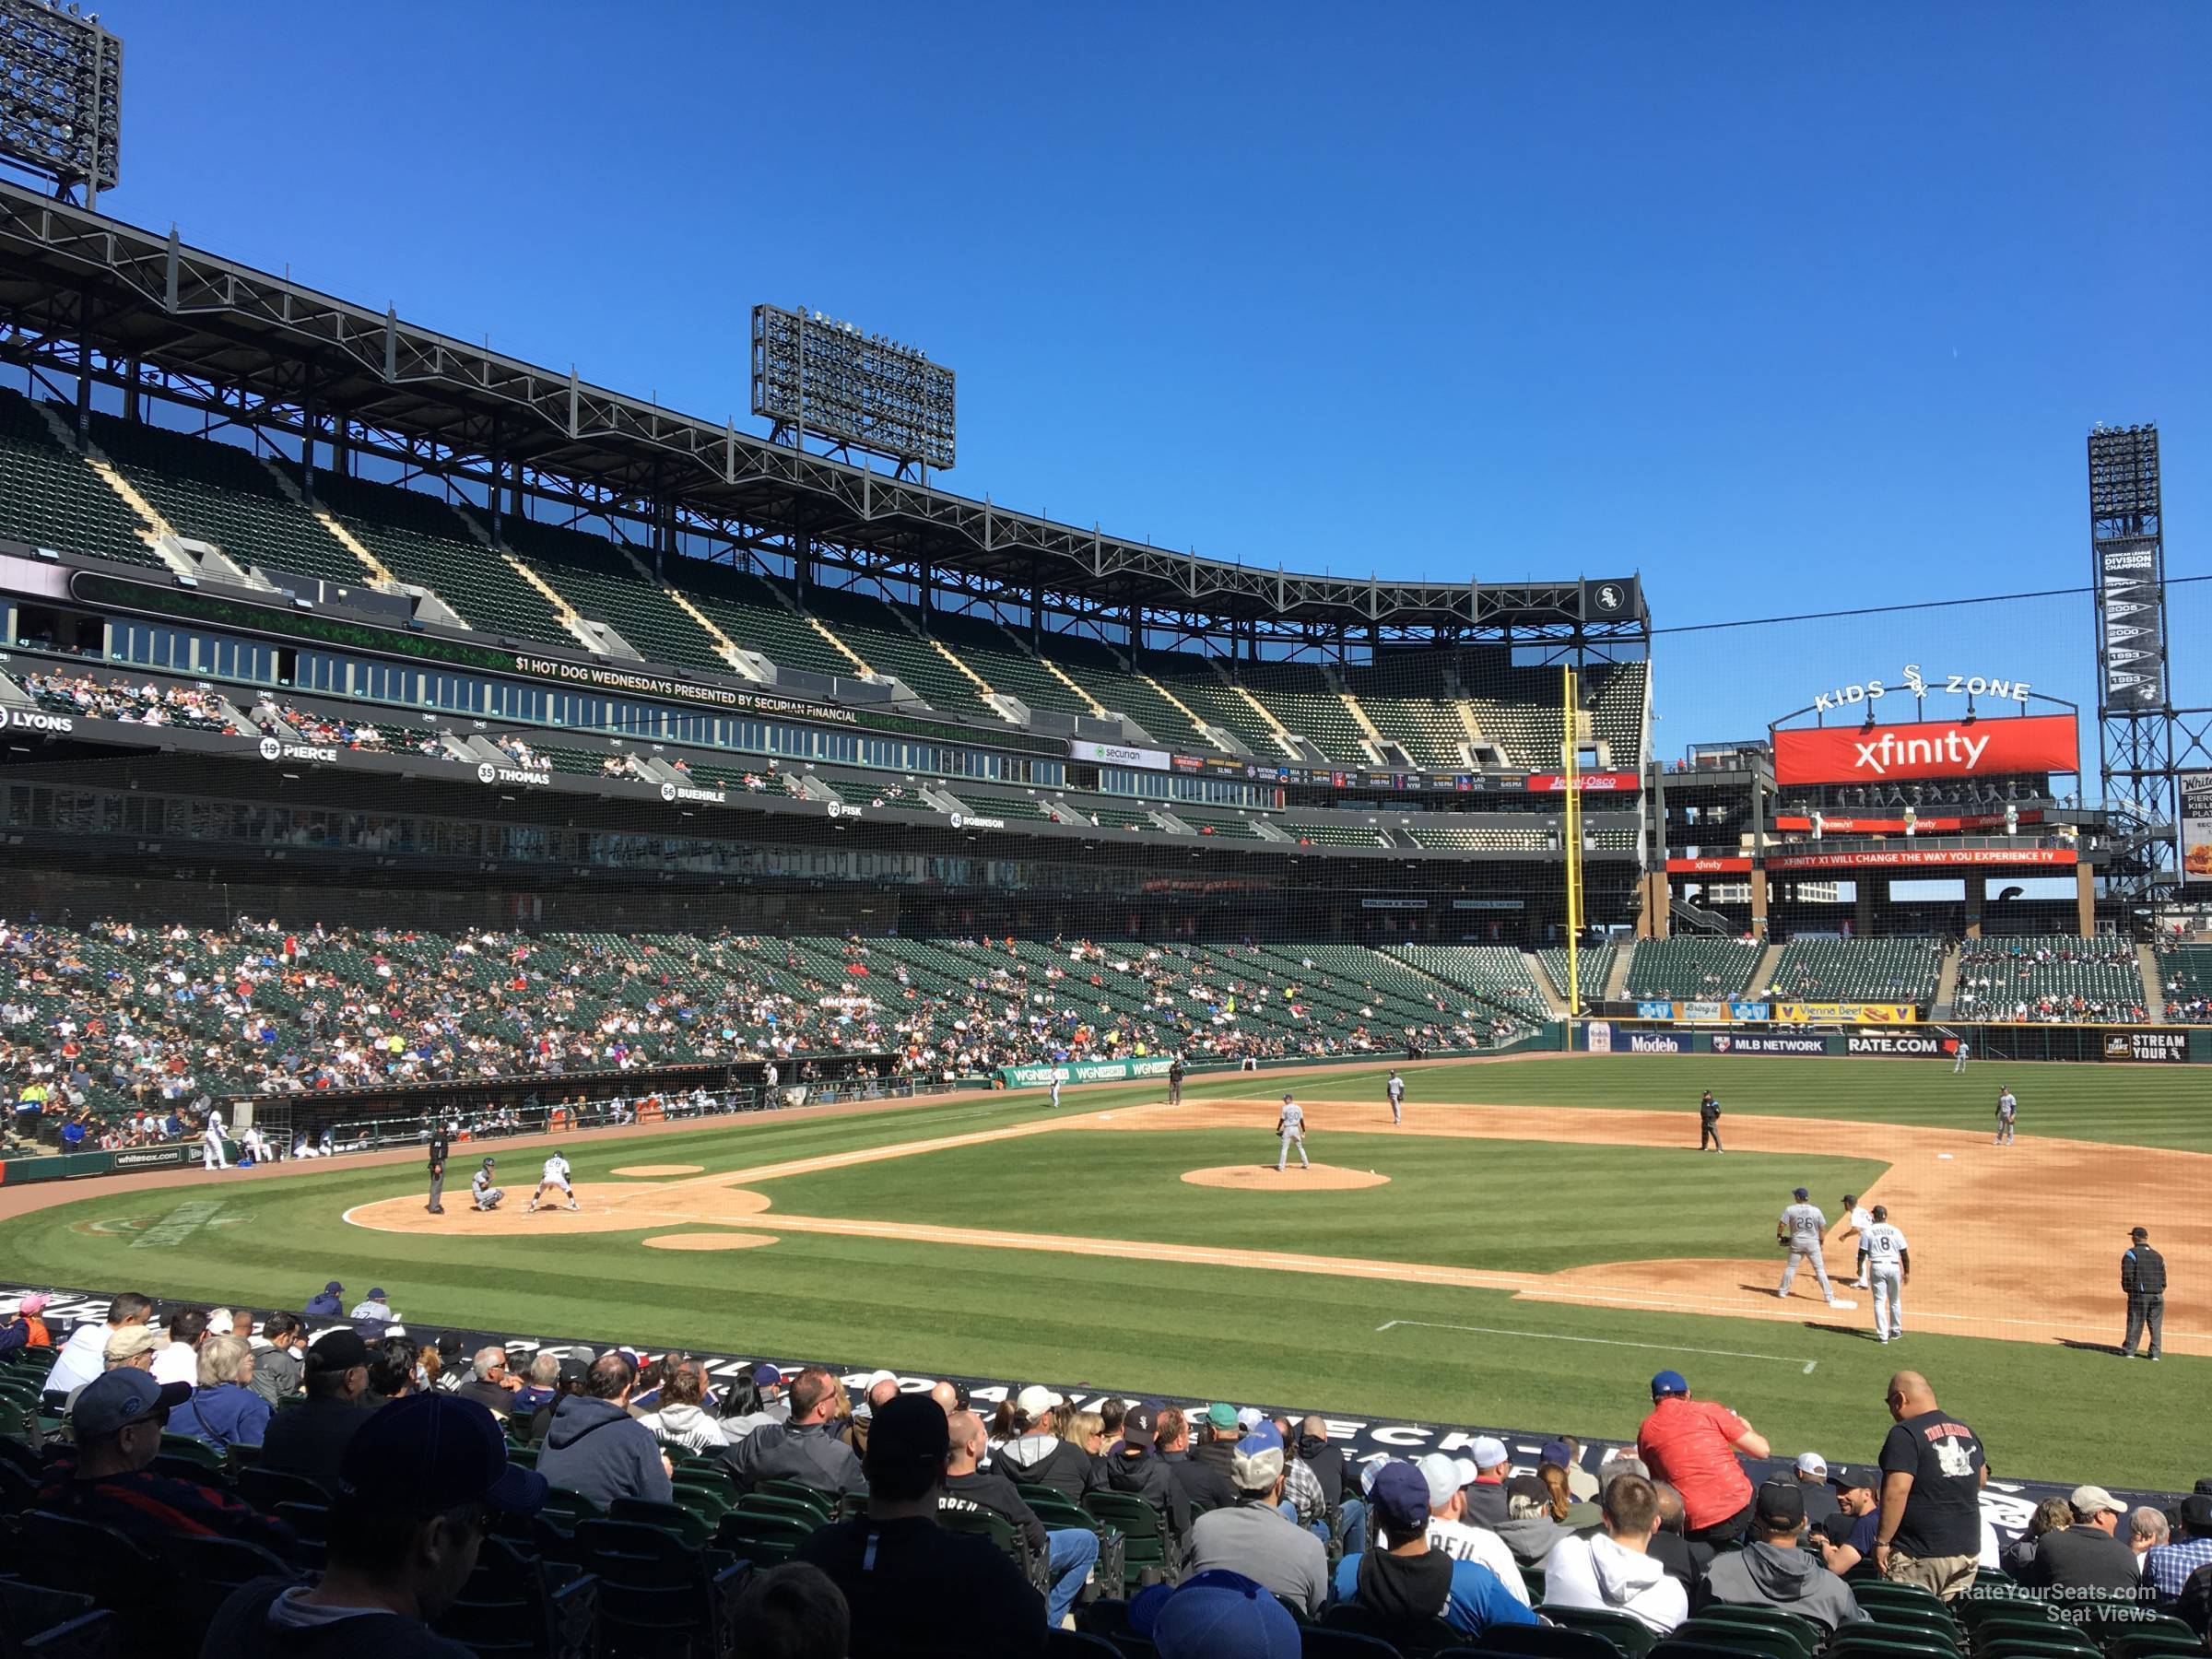 section 123, row 25 seat view  - guaranteed rate field